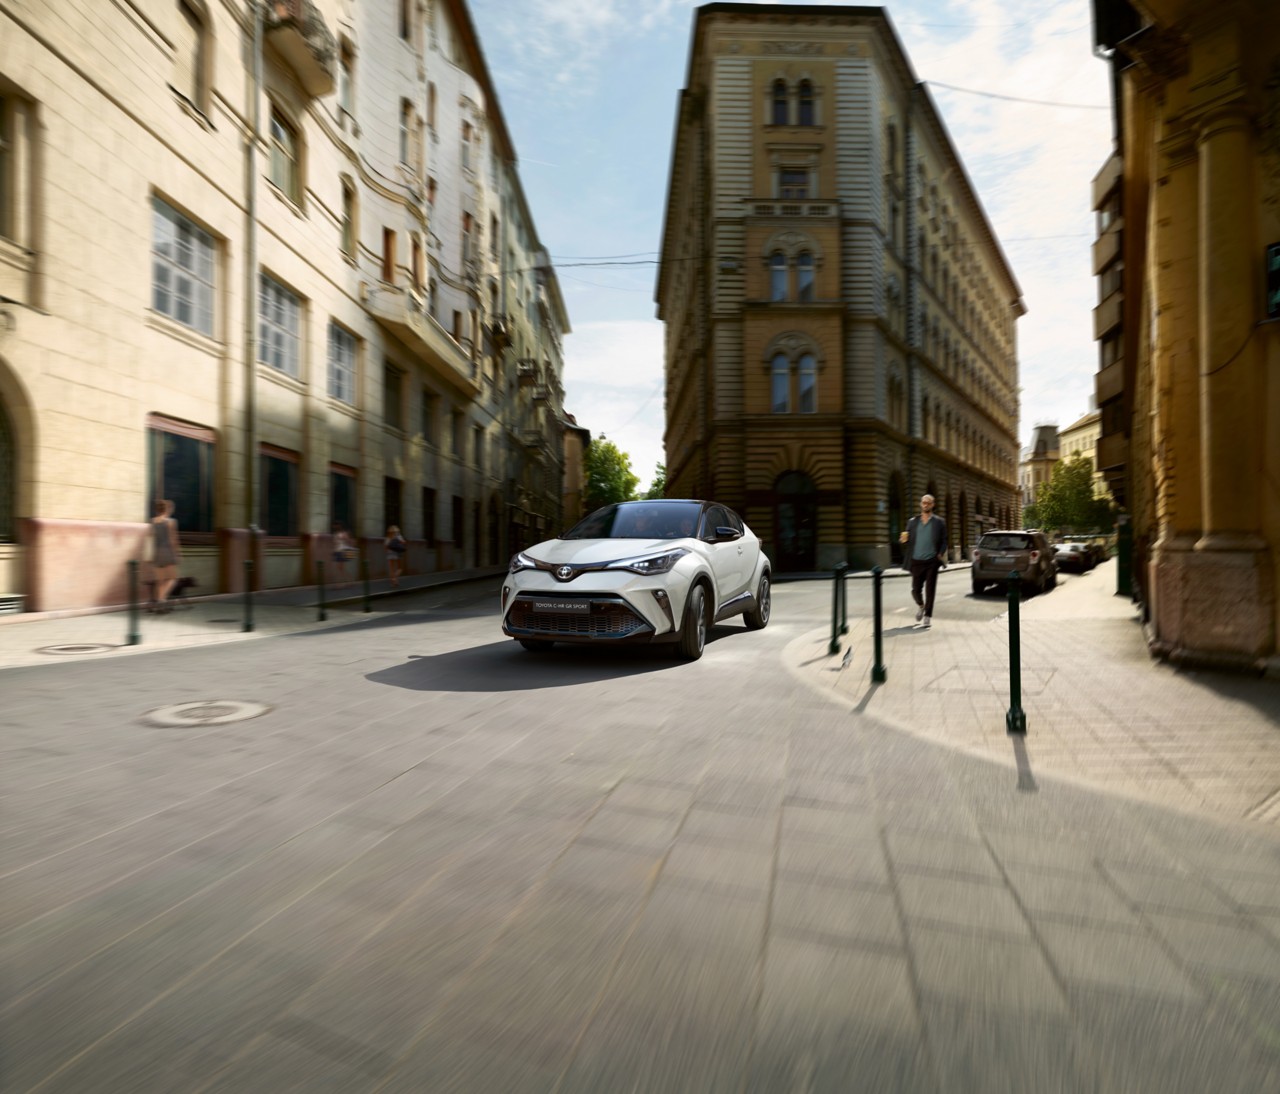 Toyota C-HR driving in the streets